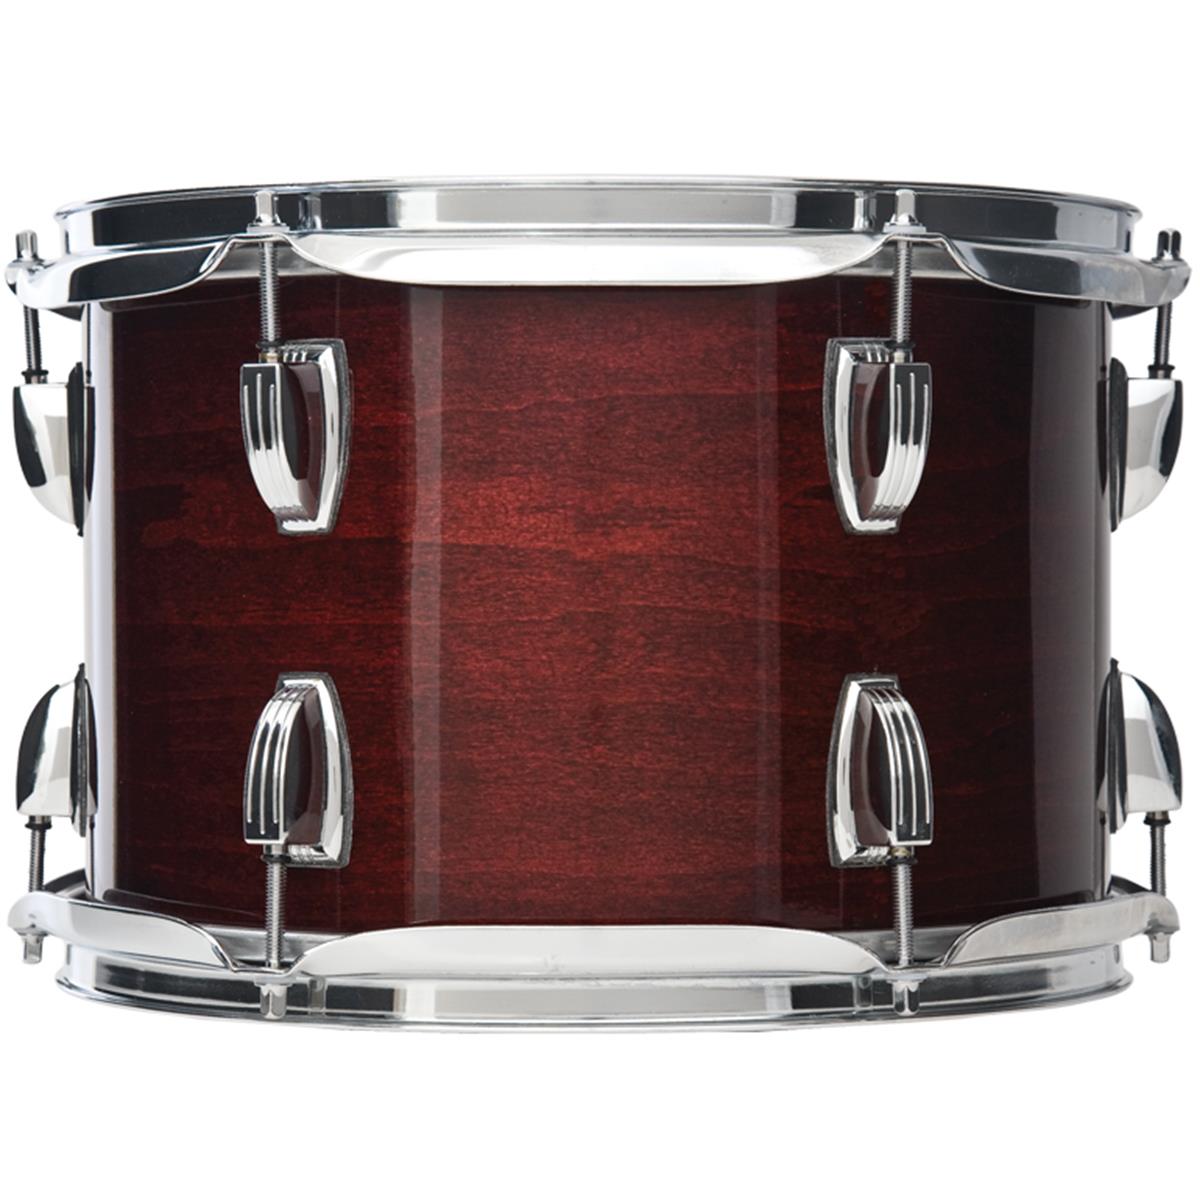 Remo Pd-1008-00-sd099 - remo-paddle Drum 8 - Pelle Skyndeep Fiberskyn -  C/chiave+battente - Batterie / Percussioni - Percussioni - Varie